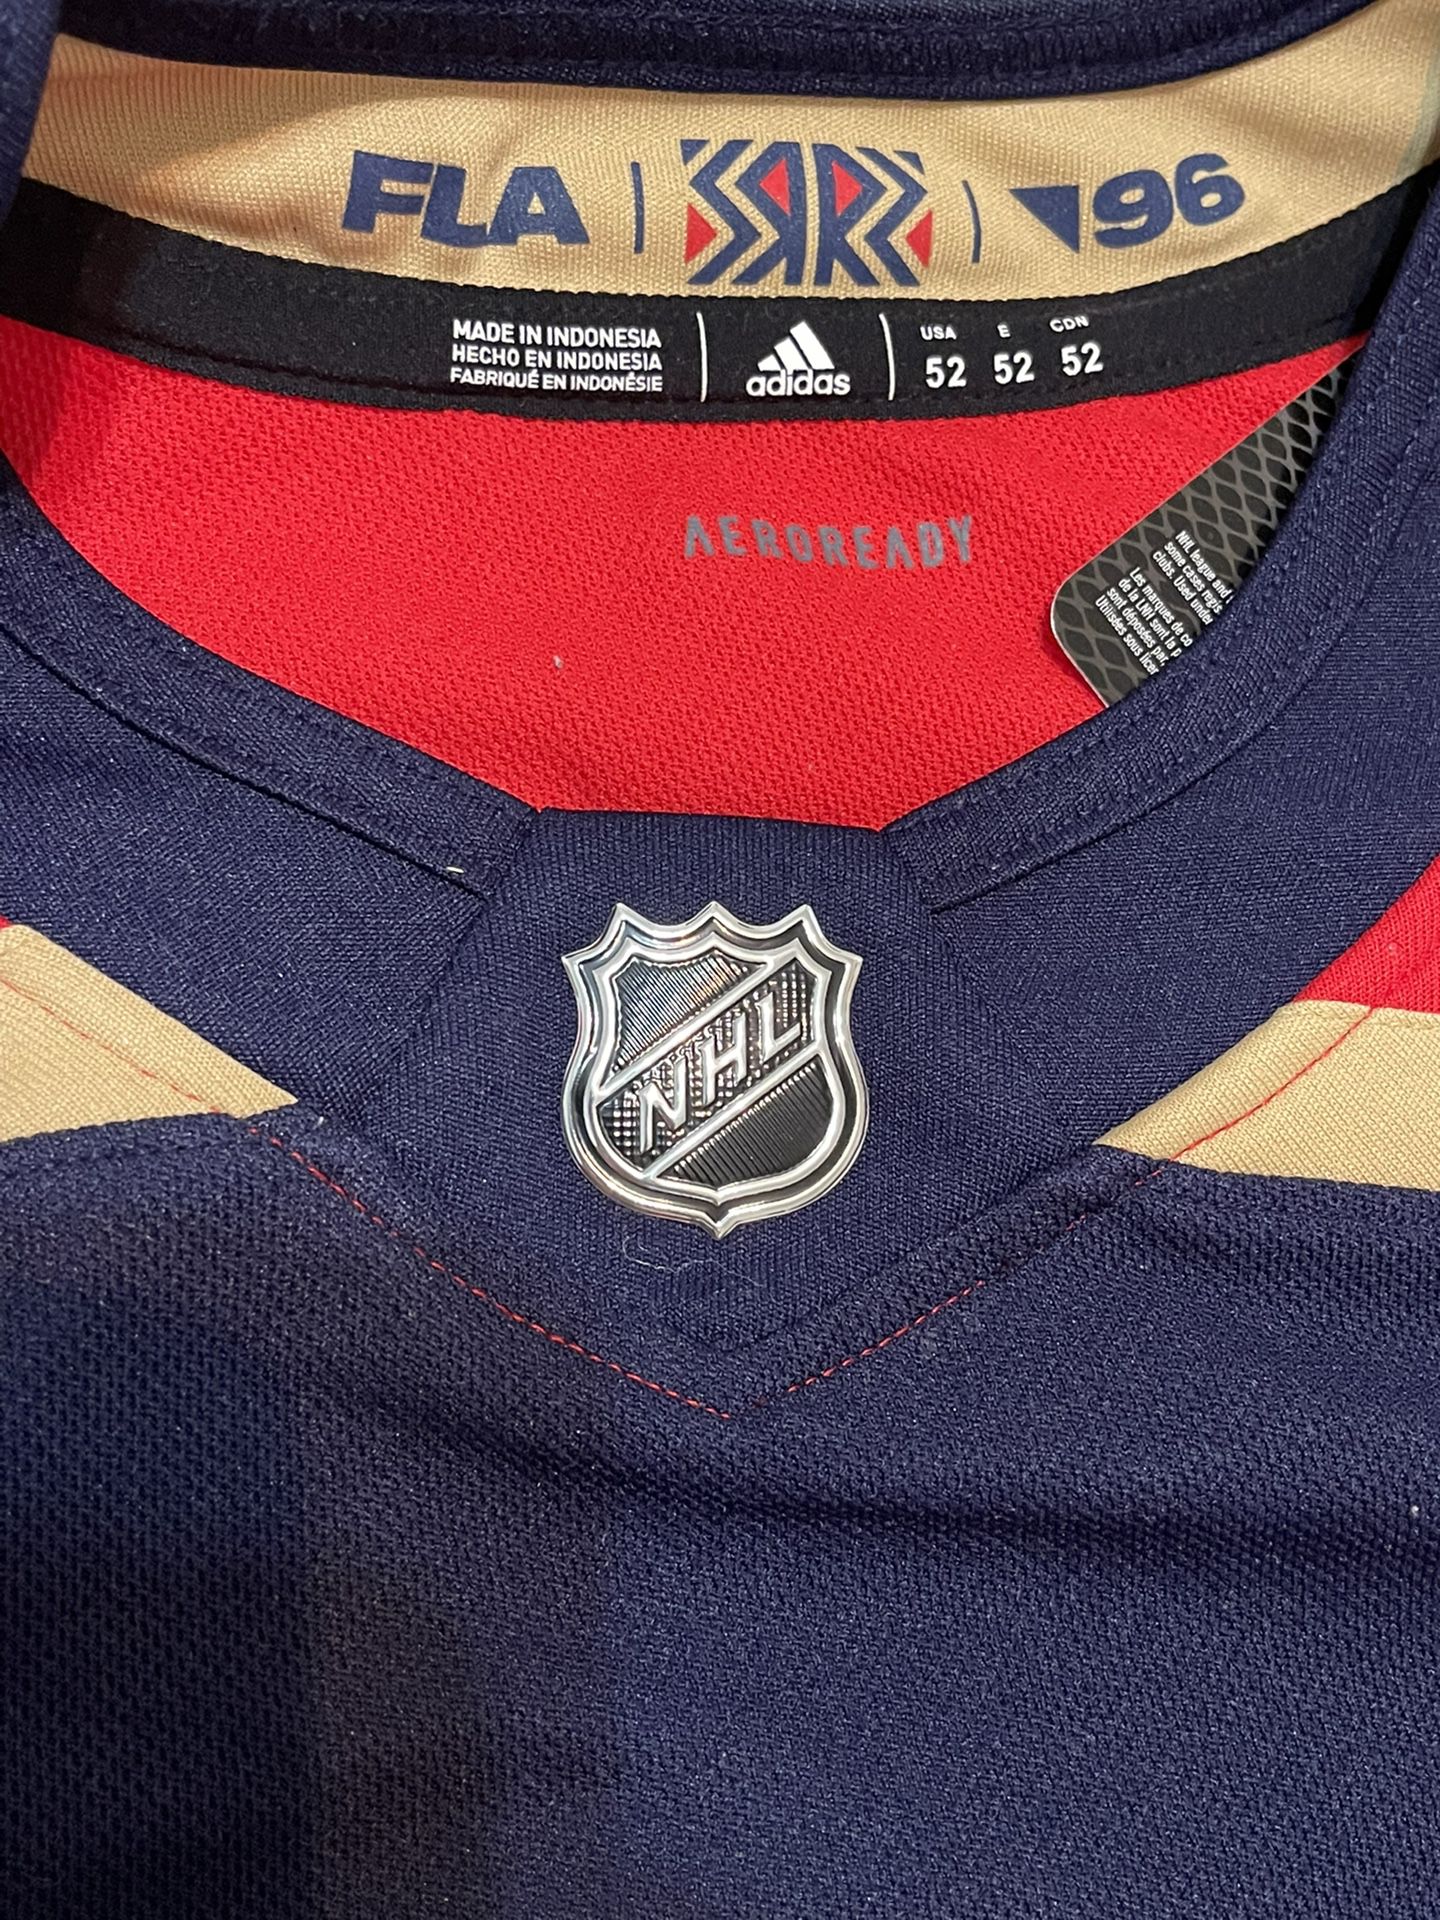 Florida Panthers Reverse Retro Adidas Authentic Jersey for Sale in Pompano  Beach, FL - OfferUp